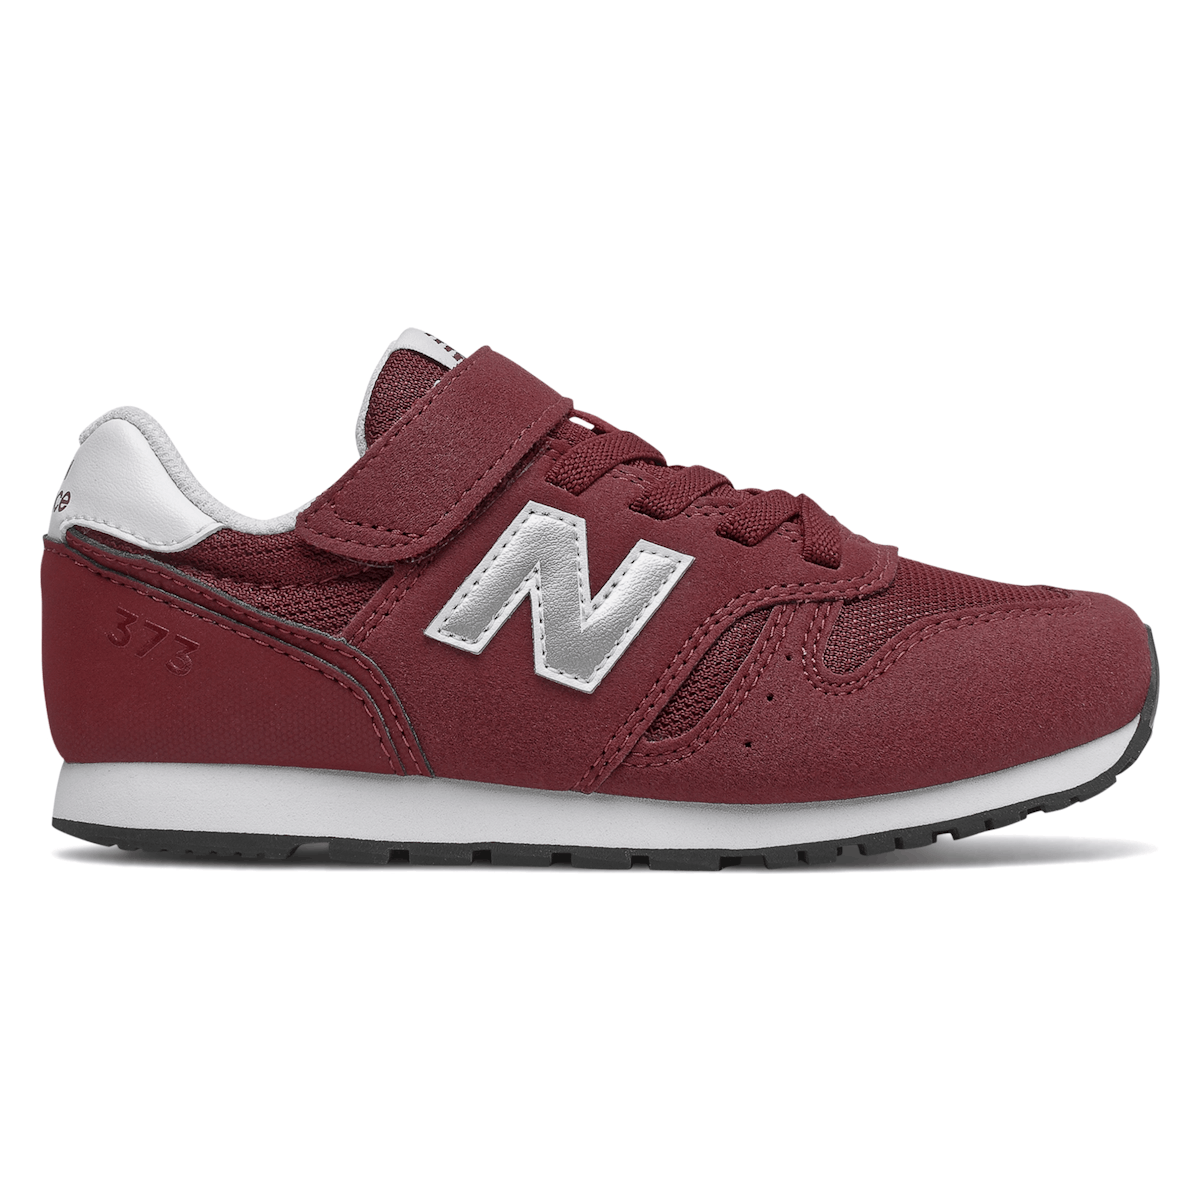 New Balance 373 Bungee Lace with Top Strap